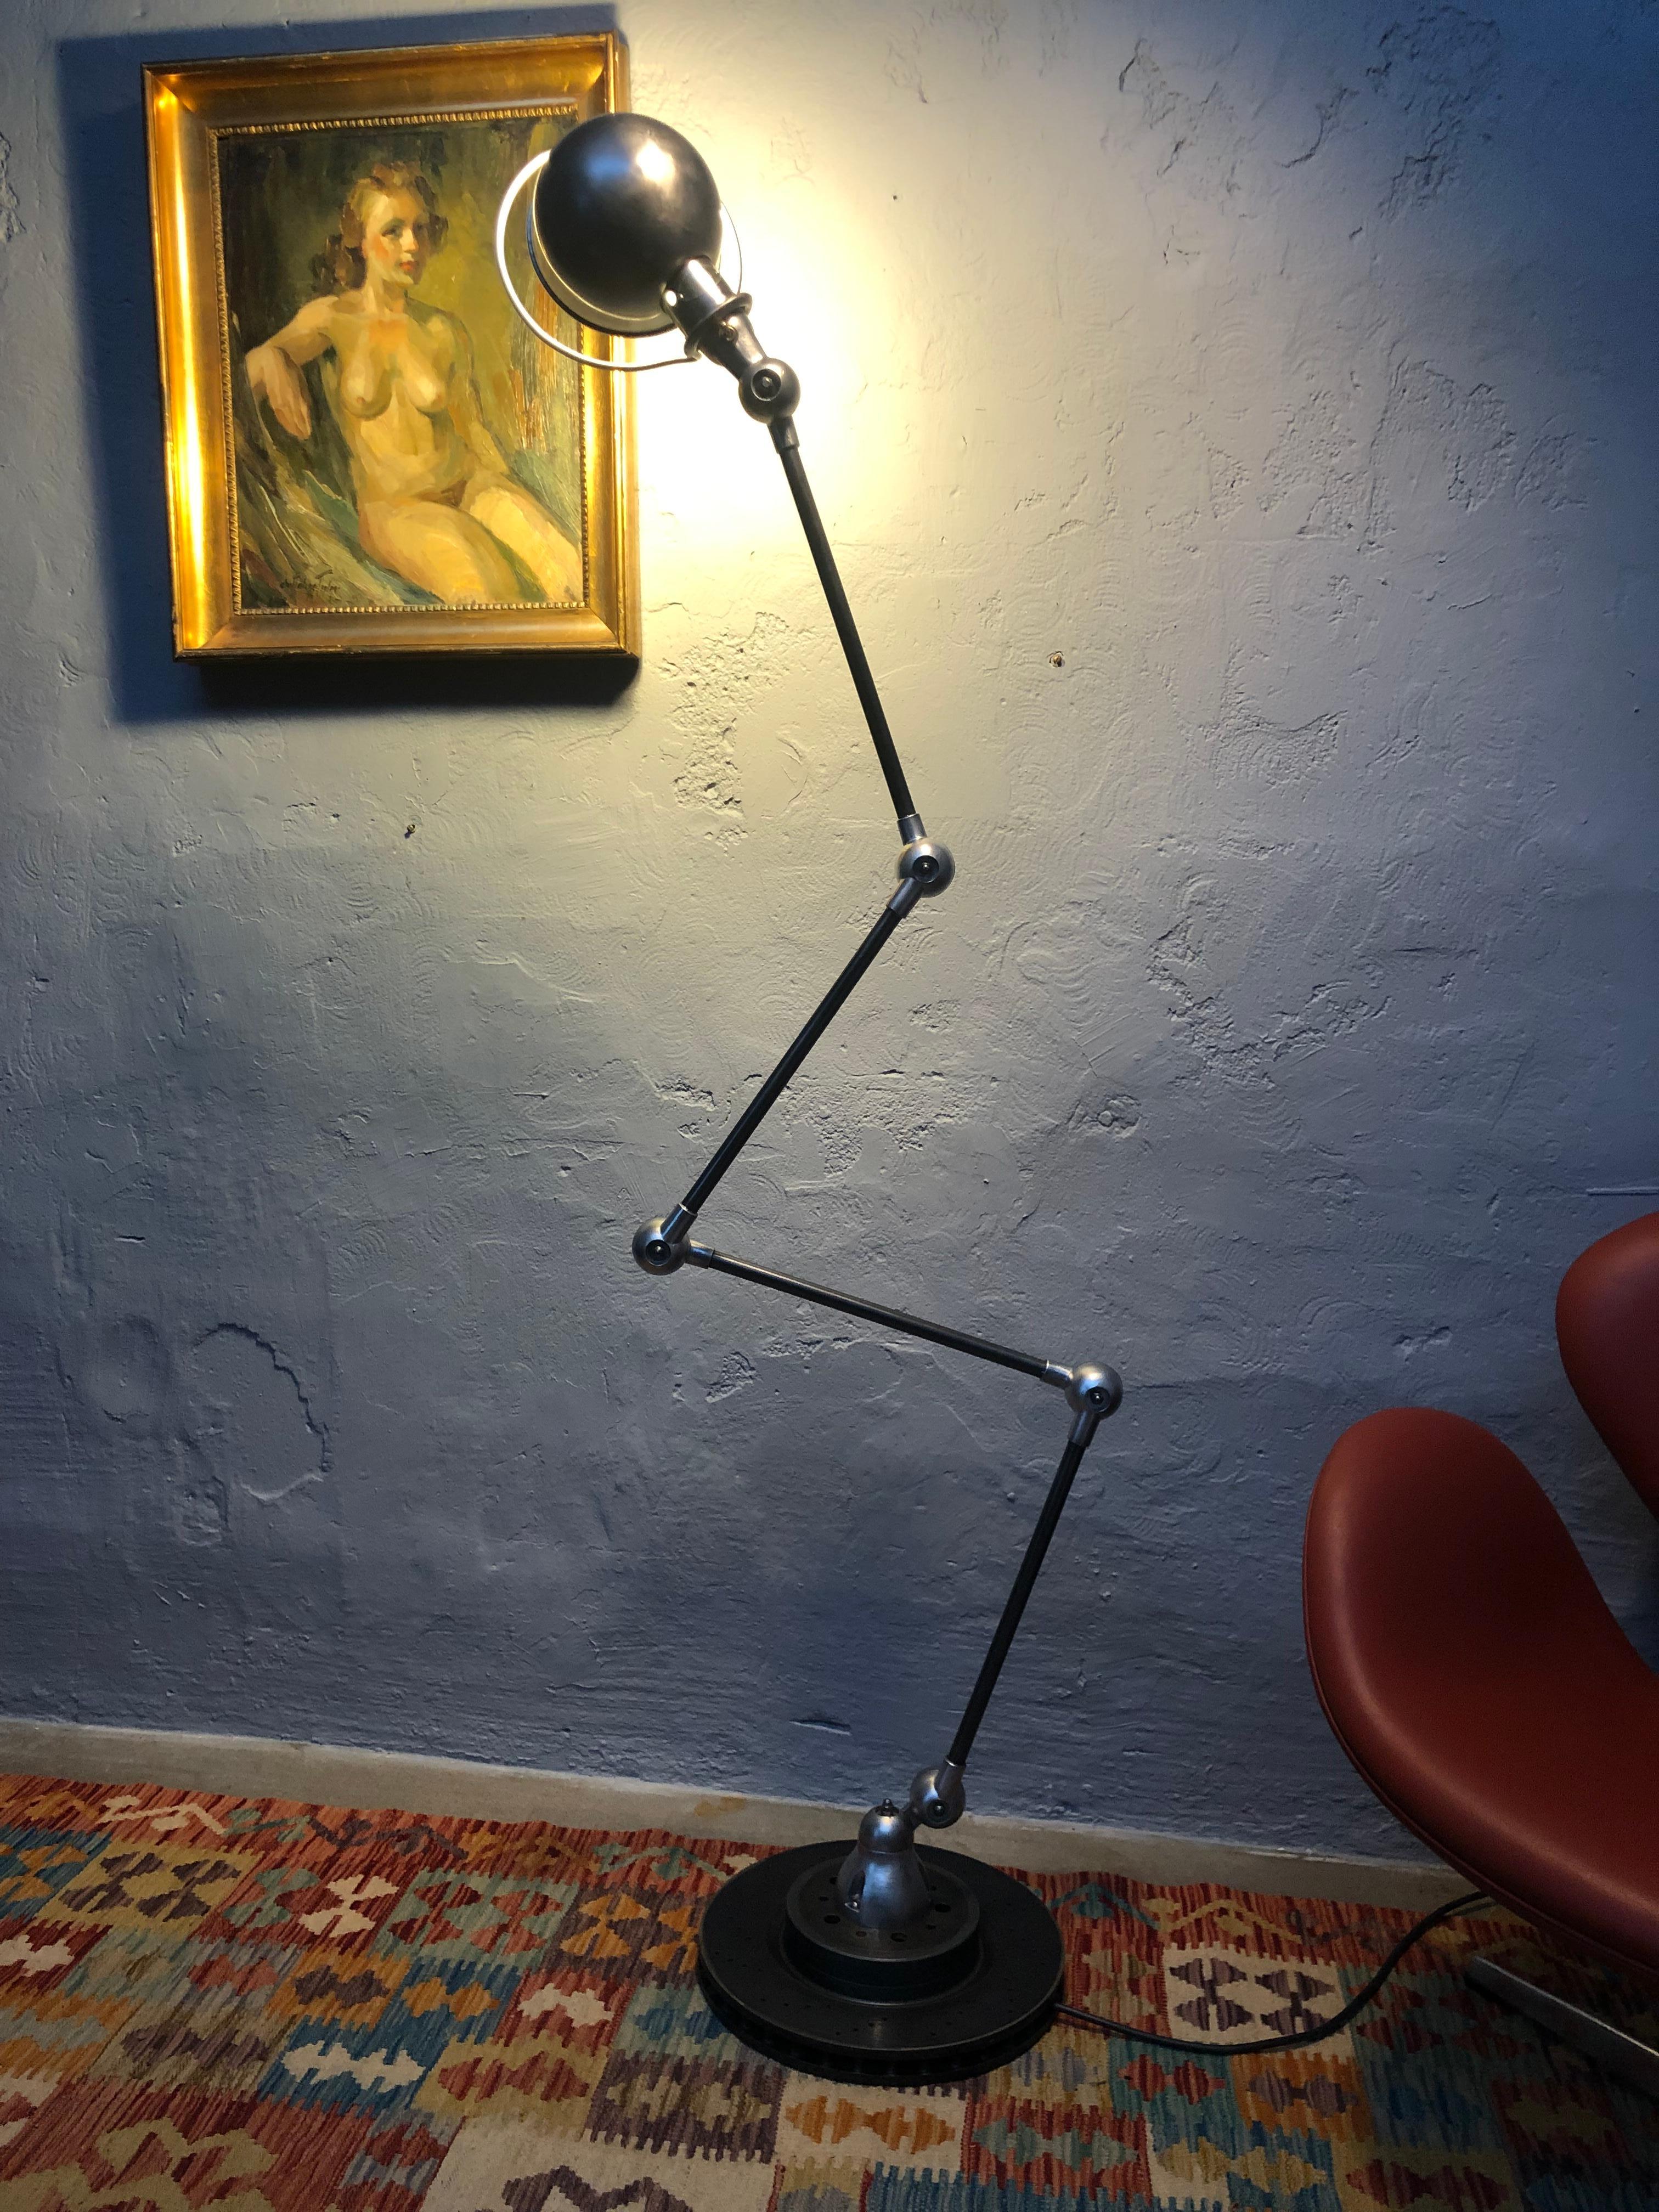 An iconic mid century 4 arm industrial work lamp by Jielde of France.
A cordless, functional lamp, ideally suited for any purpose and fully articulated,
thanks to this unique design.
With a base that can rotate 360 degrees and a reflector that can